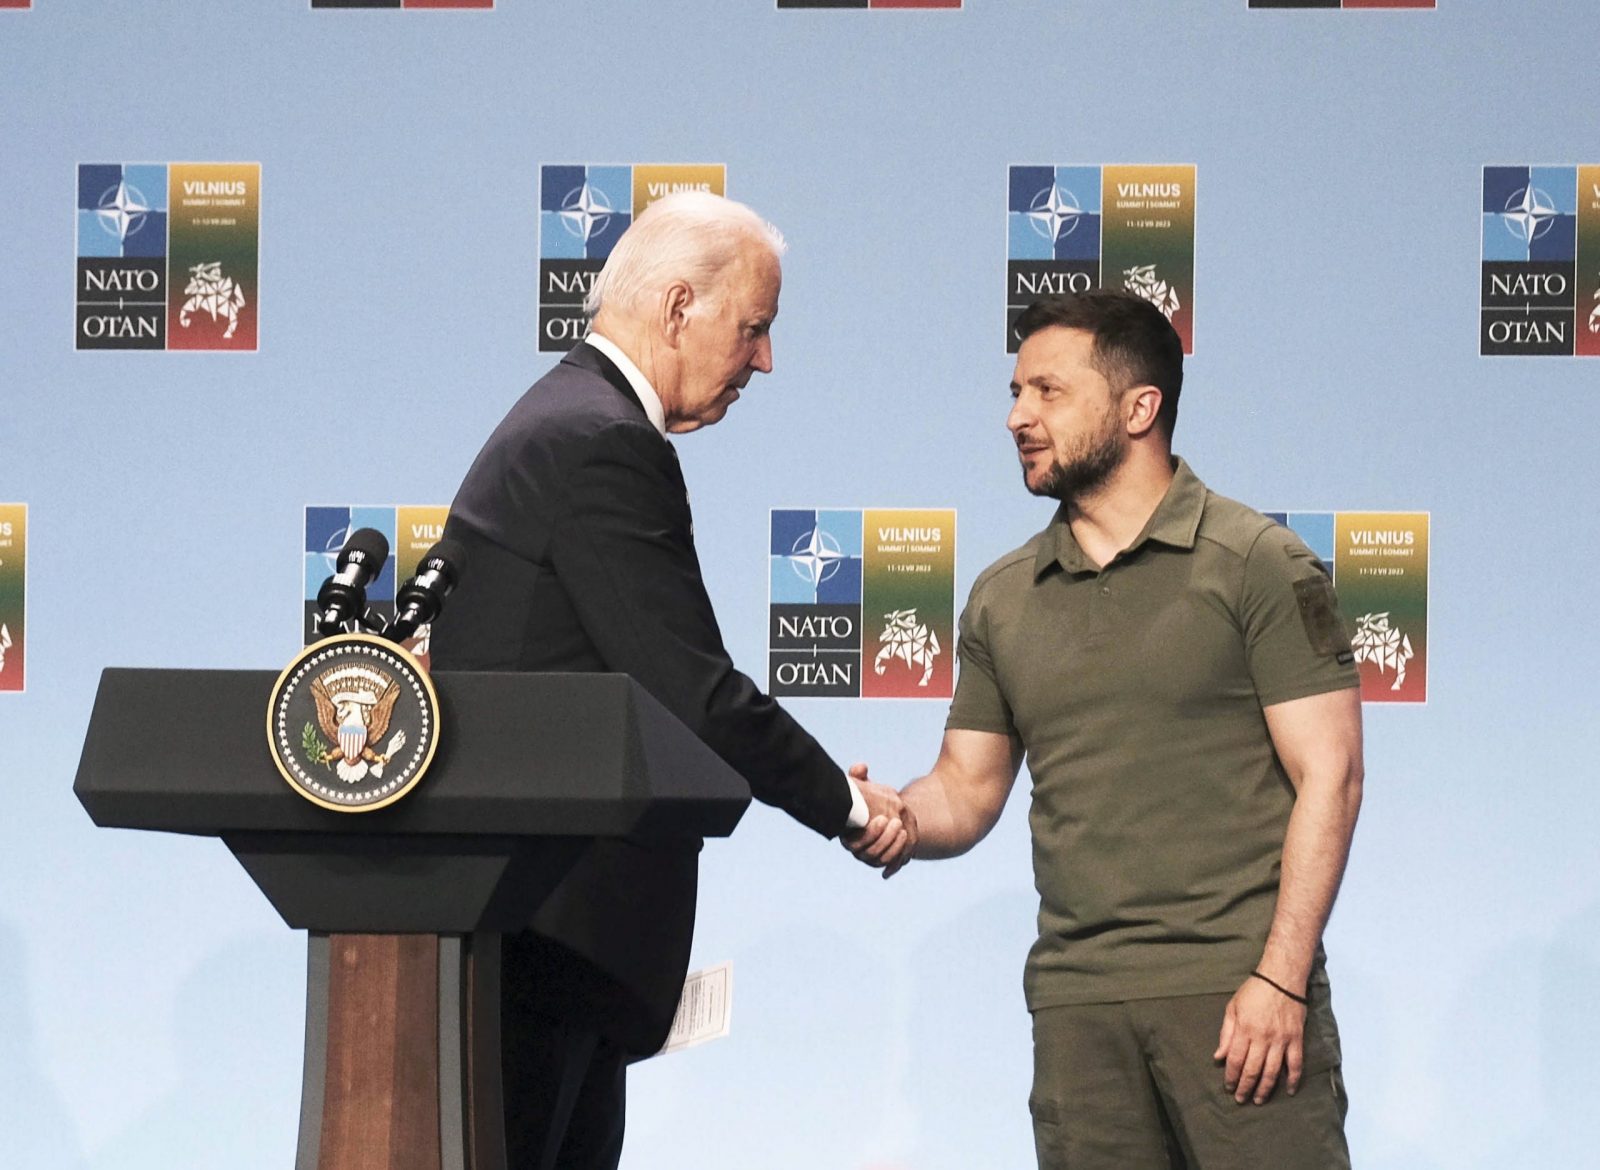 epa10741775 US President Joe Biden and Ukraine's President Volodymyr Zelensky sjake hands at a media conference to announce a 'Joint Declaration of Support for Ukraine'by the G7 states and the EU during the NATO ?summit in Vilnius, Lithuania, 12 July 2023. The North Atlantic Treaty Organization (NATO) Summit takes place in Vilnius on 11 and 12 July 2023 with the alliance's leaders expected to adopt new defense plans.  EPA/VALDA KALNINç